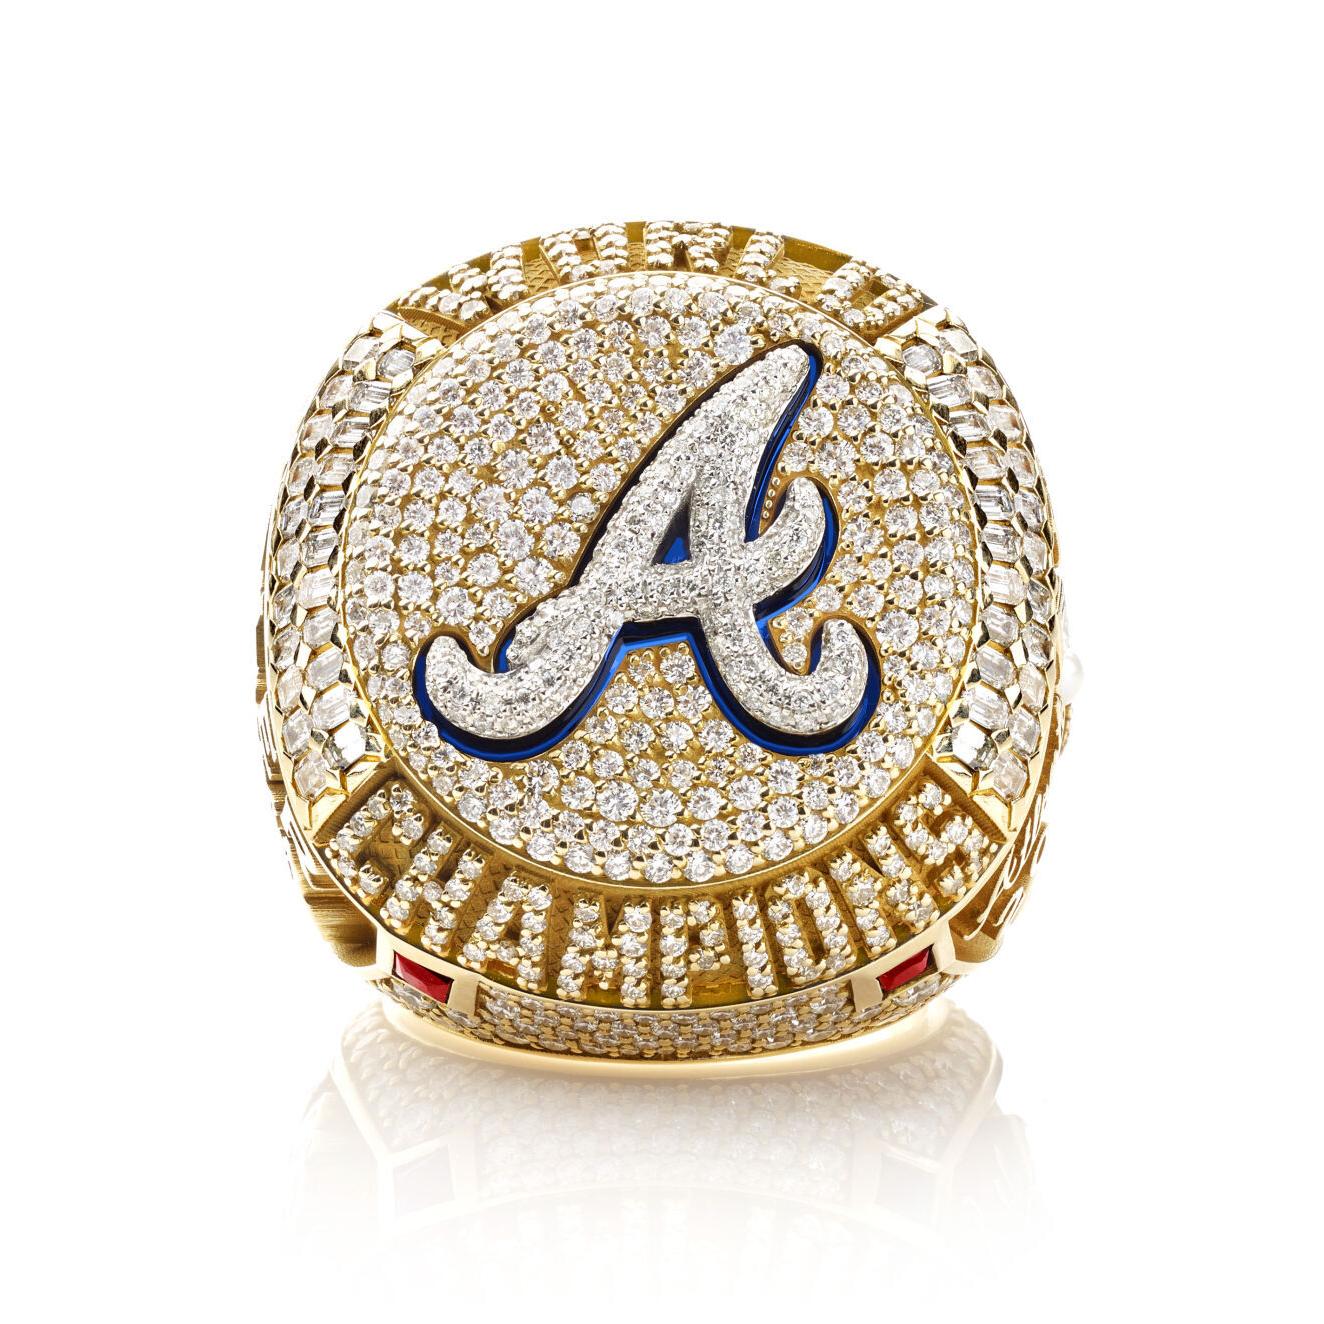 Braves' incredible World Series rings include tributes to